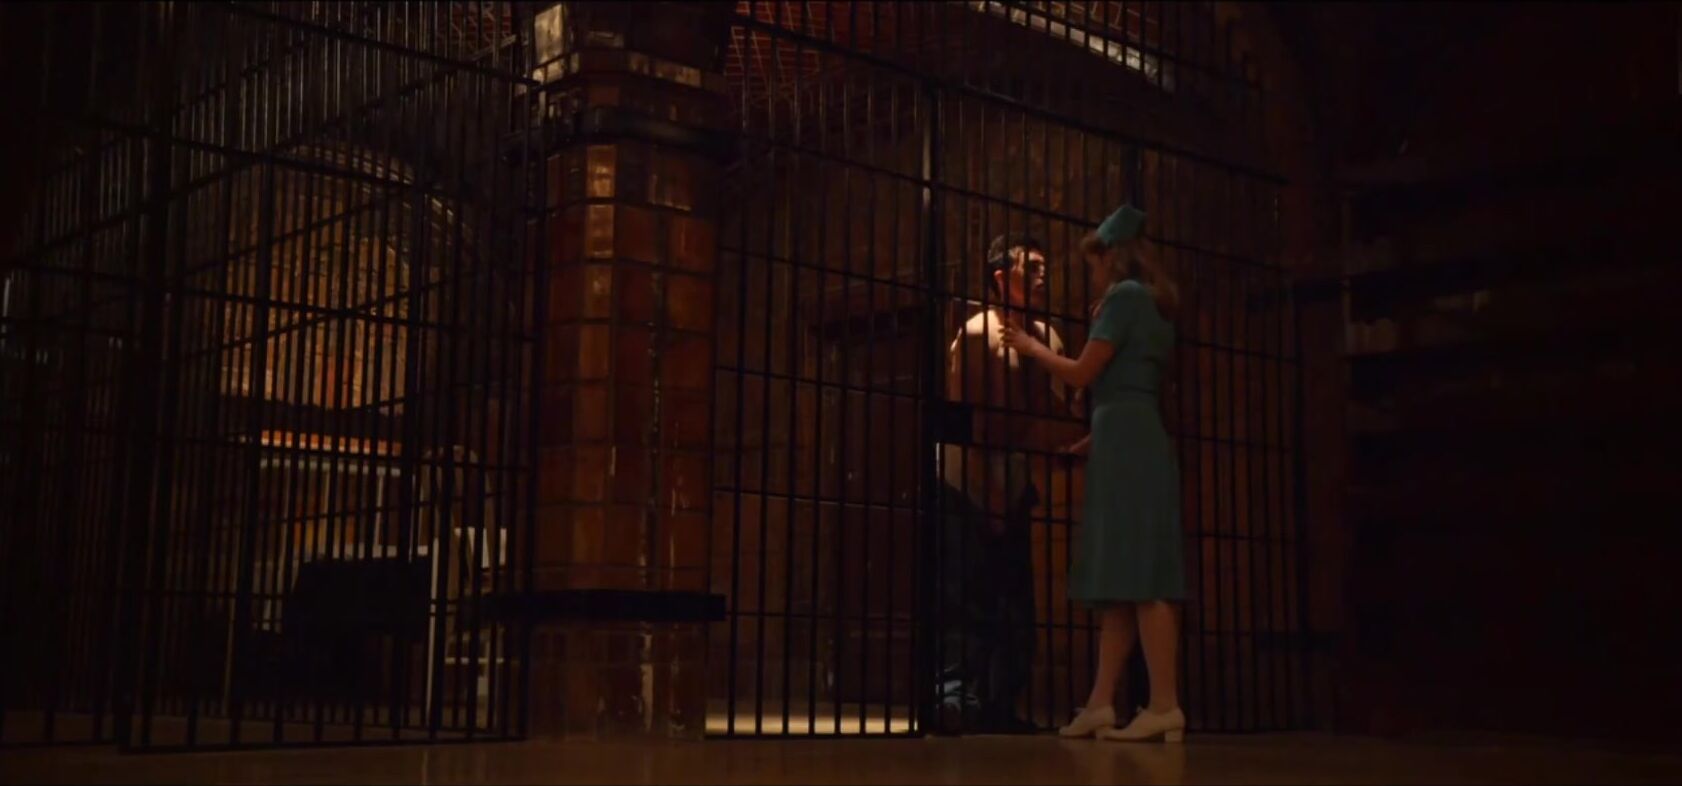 Nudity Alice Englert can't resist caged boy and goes jerking him off in TV series Ratched Analplay